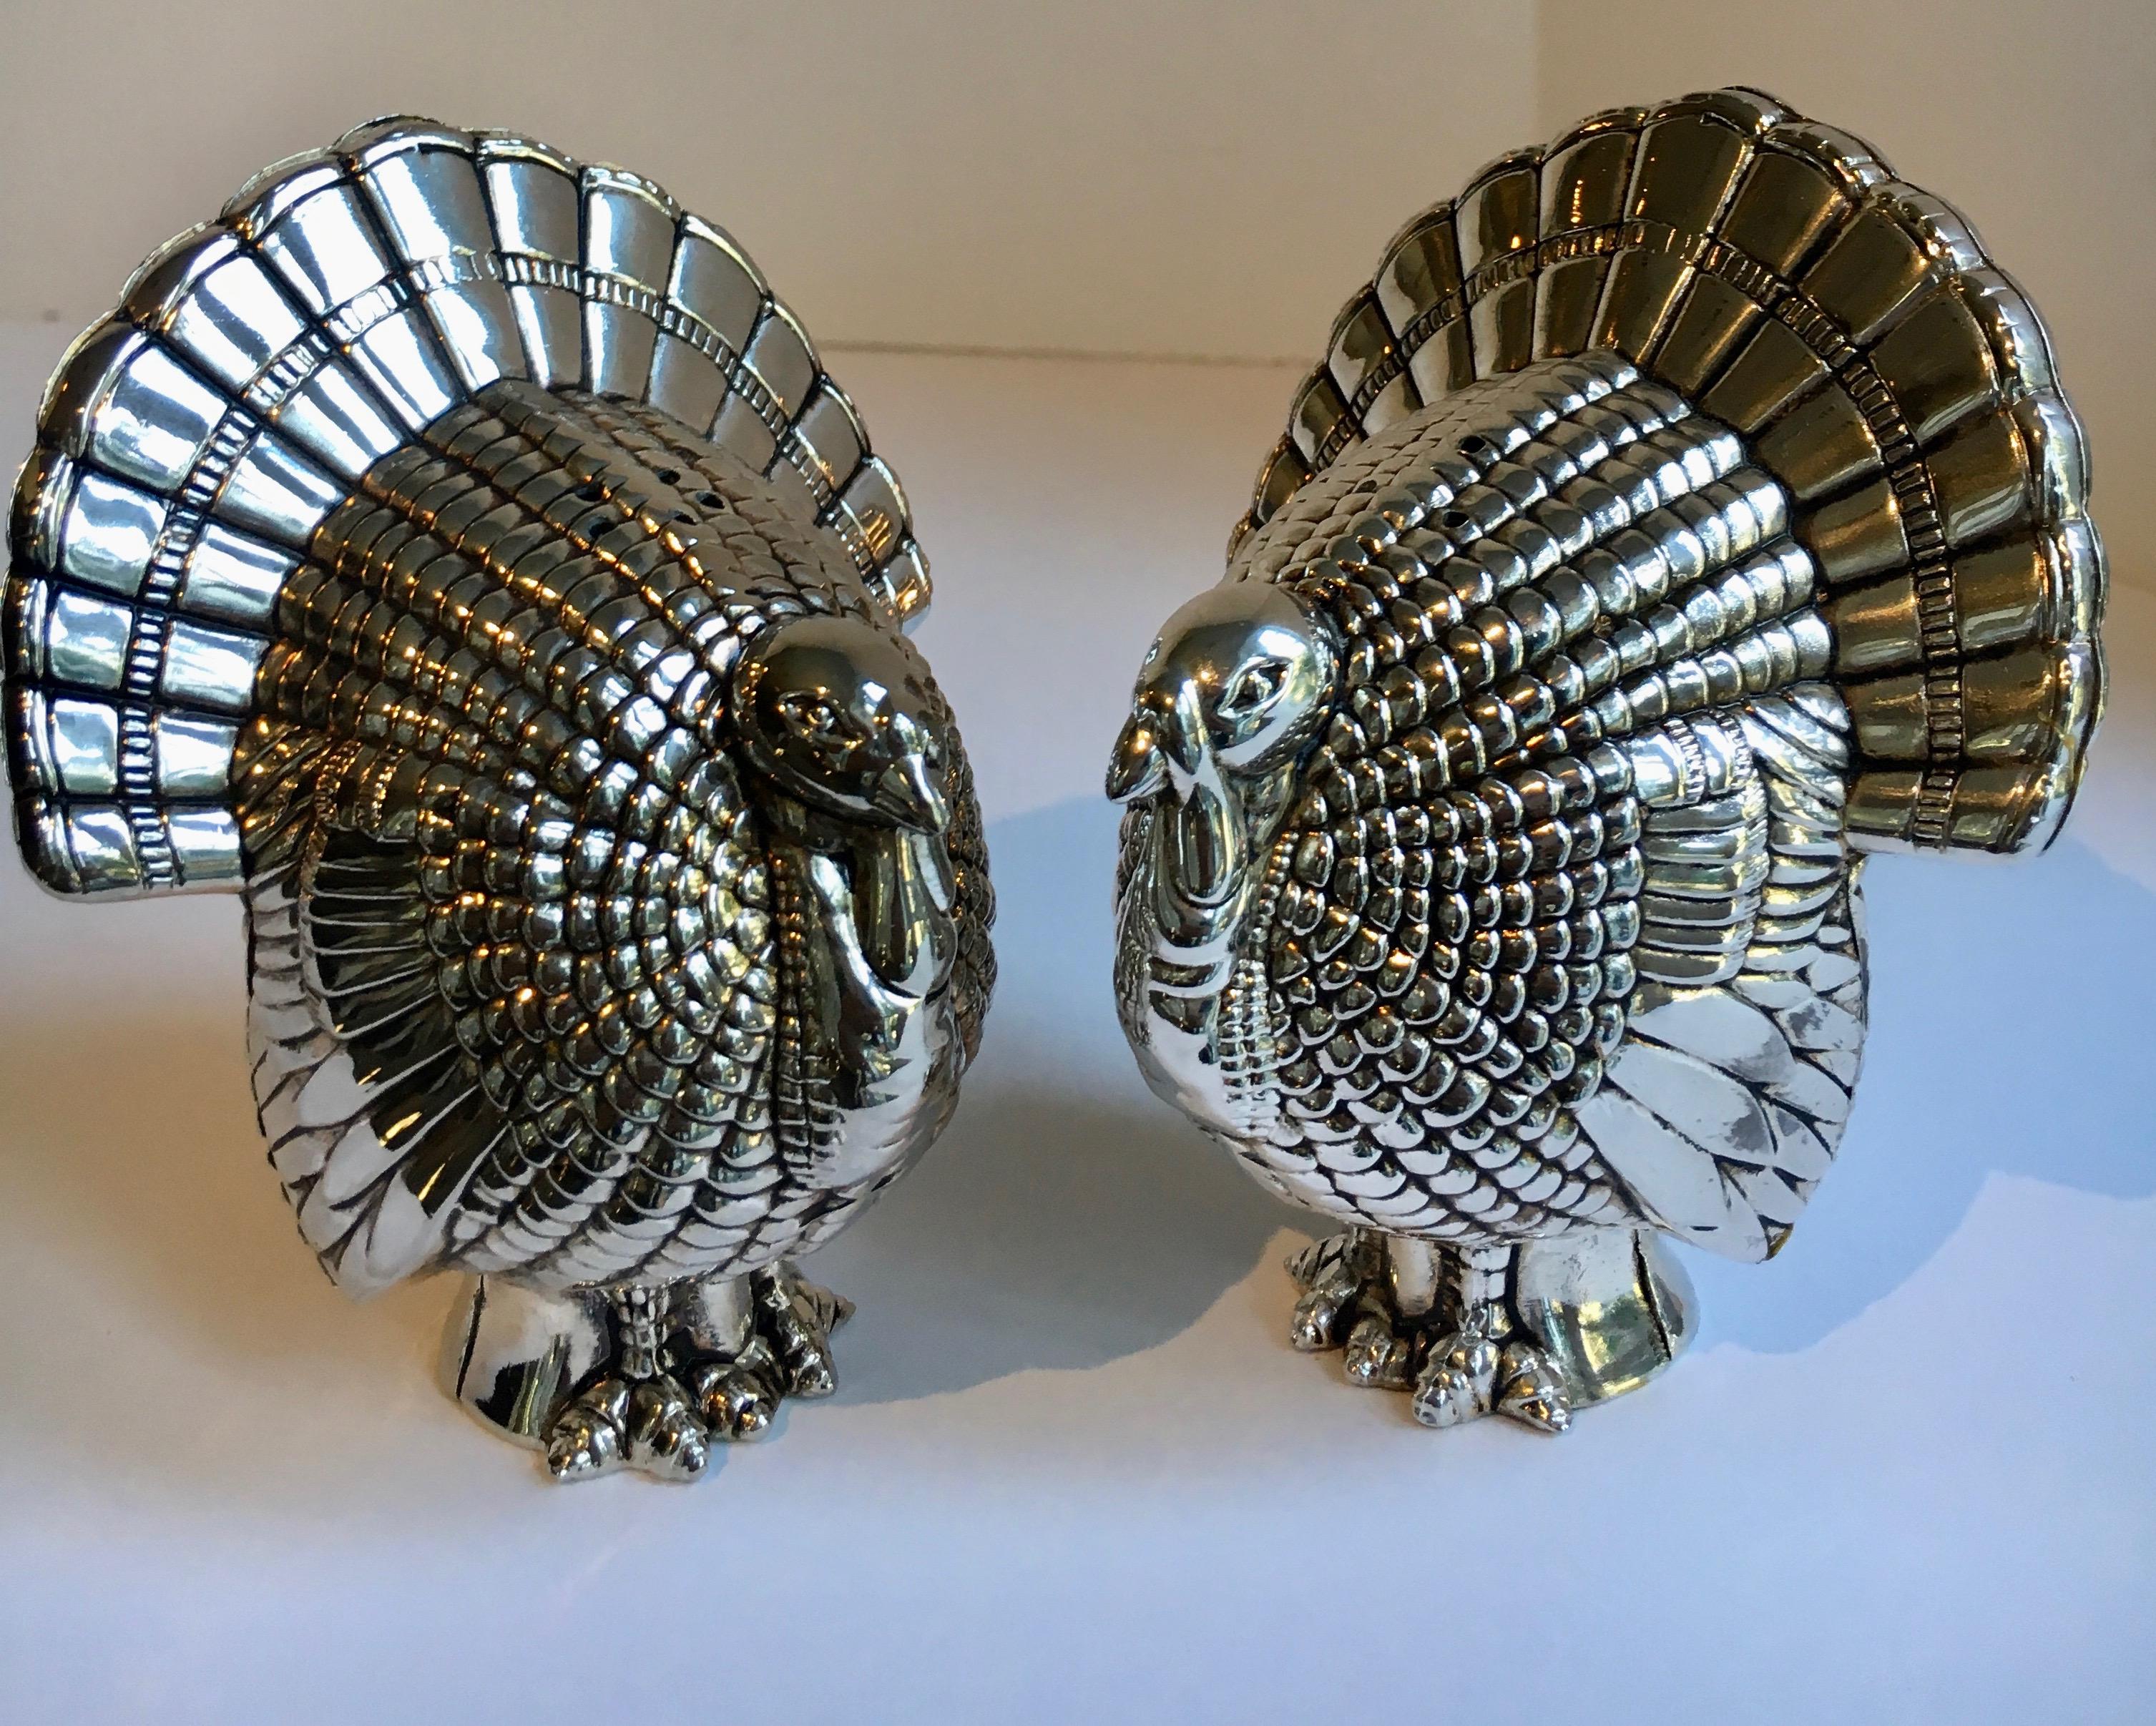 Silver plate Turkey salt and pepper, just in time for thanksgiving! Or if you are sodium intolerant they work great for cinnamon and powdered sugar!! Gobble Gobble.

The bottom closure on one is plastic, the other cork, which needs a knife to